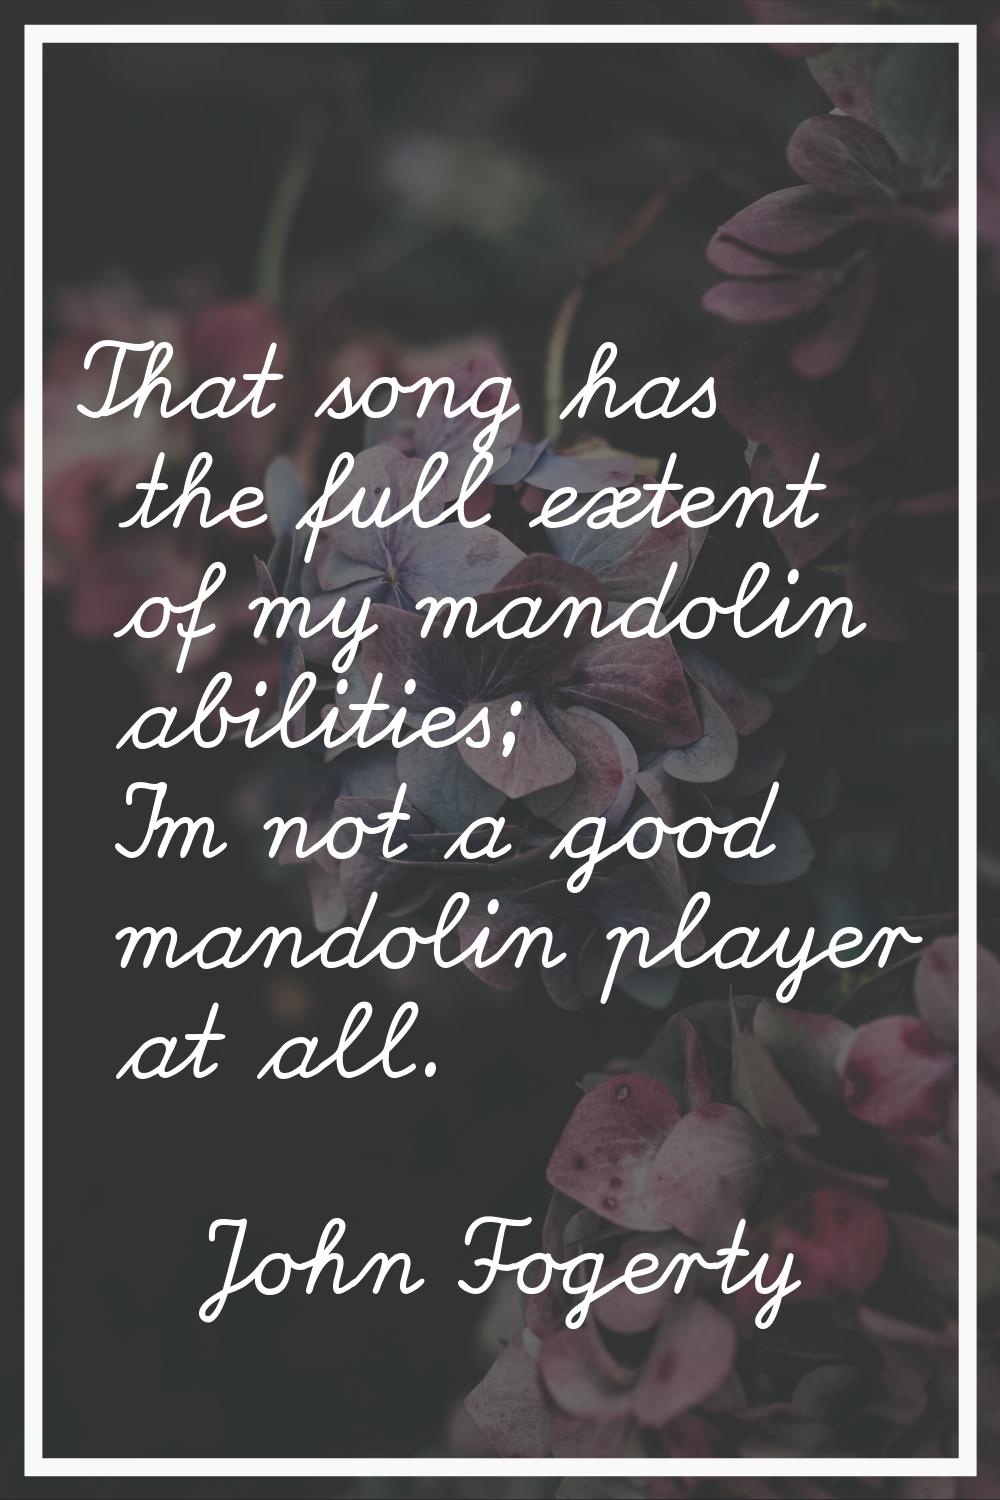 That song has the full extent of my mandolin abilities; I'm not a good mandolin player at all.